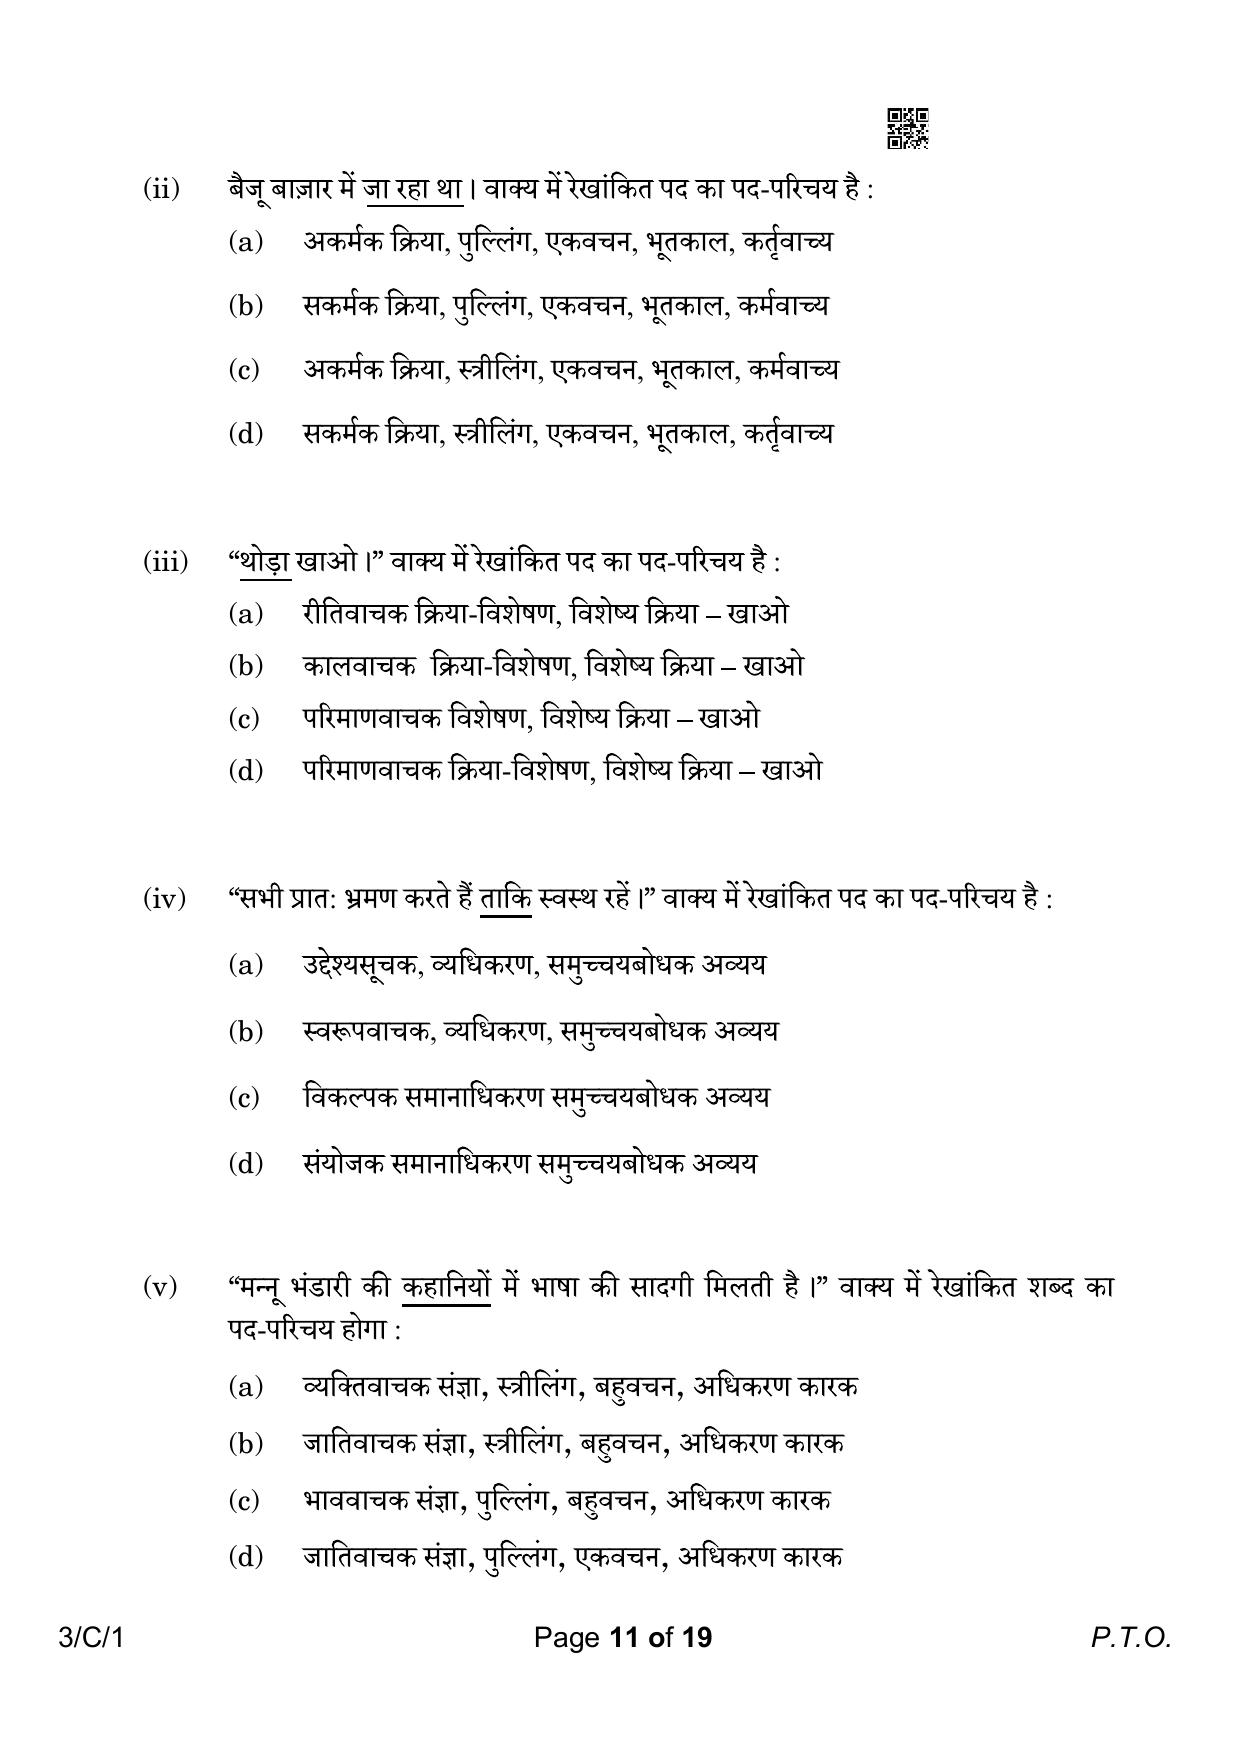 CBSE Class 10 3-1 Hindi A 2023 (Compartment) Question Paper - Page 11